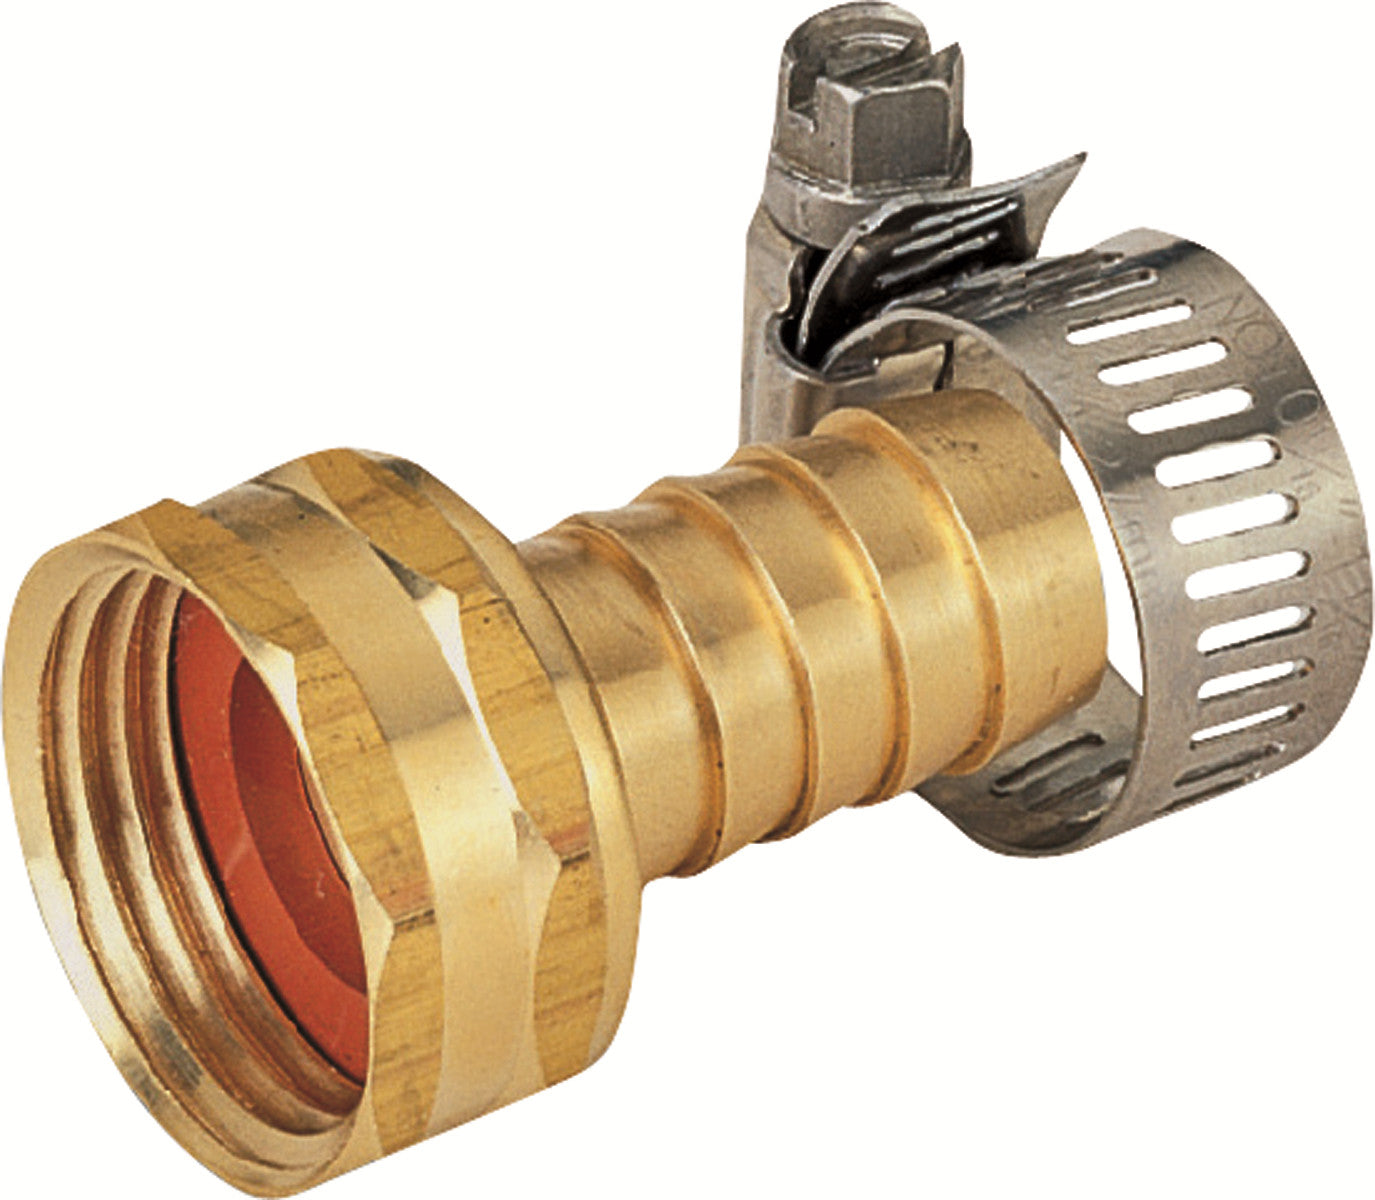 Landscapers Select Brass 5/8" Female Hose End Repair